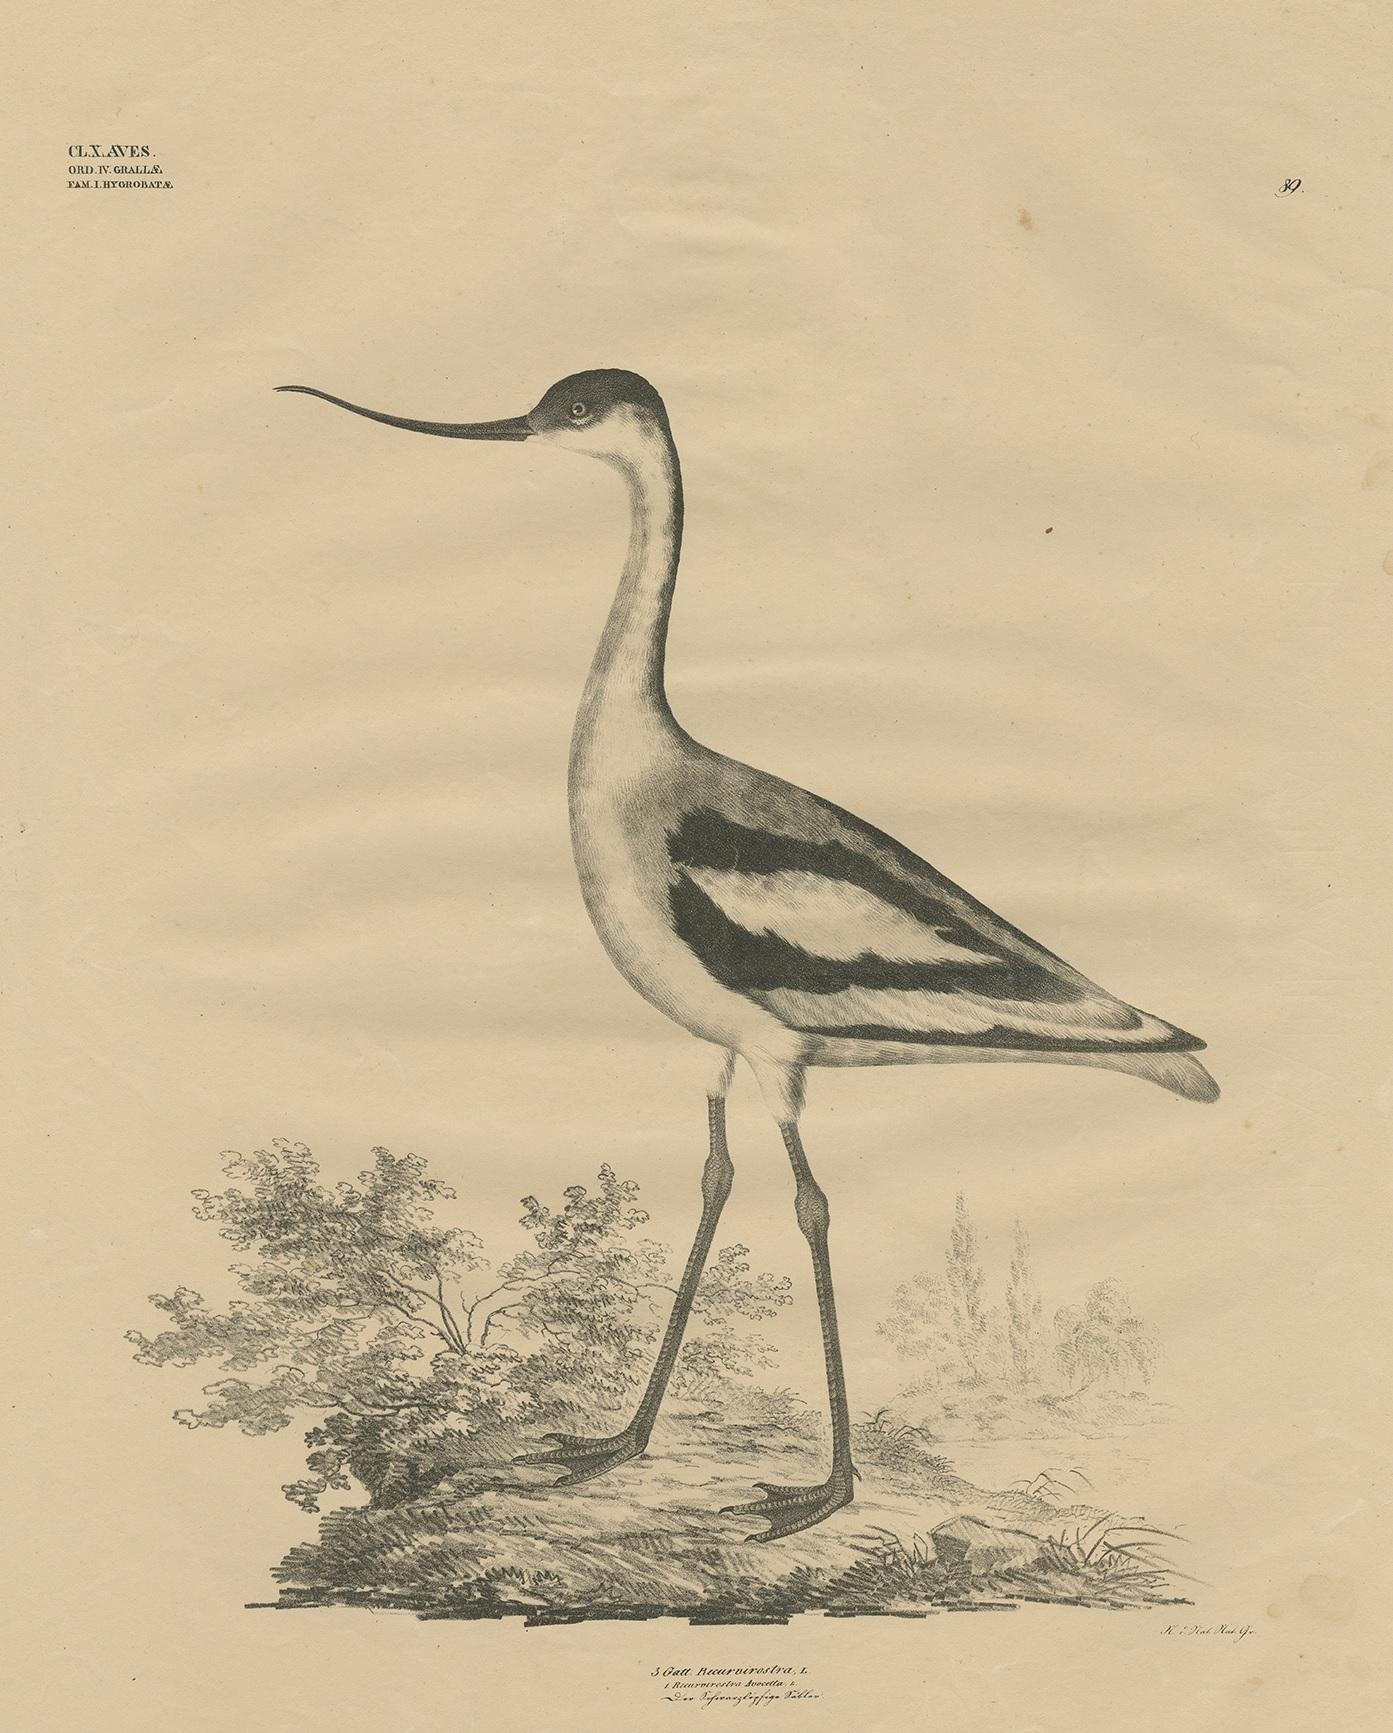 Antique bird print titled 'Gatt Recurvirostra'. Large lithograph of the pied avocet, a large black and white wader in the avocet and stilt family, Recurvirostridae. They breed in temperate Europe and across the Palearctic to Central Asia then on to